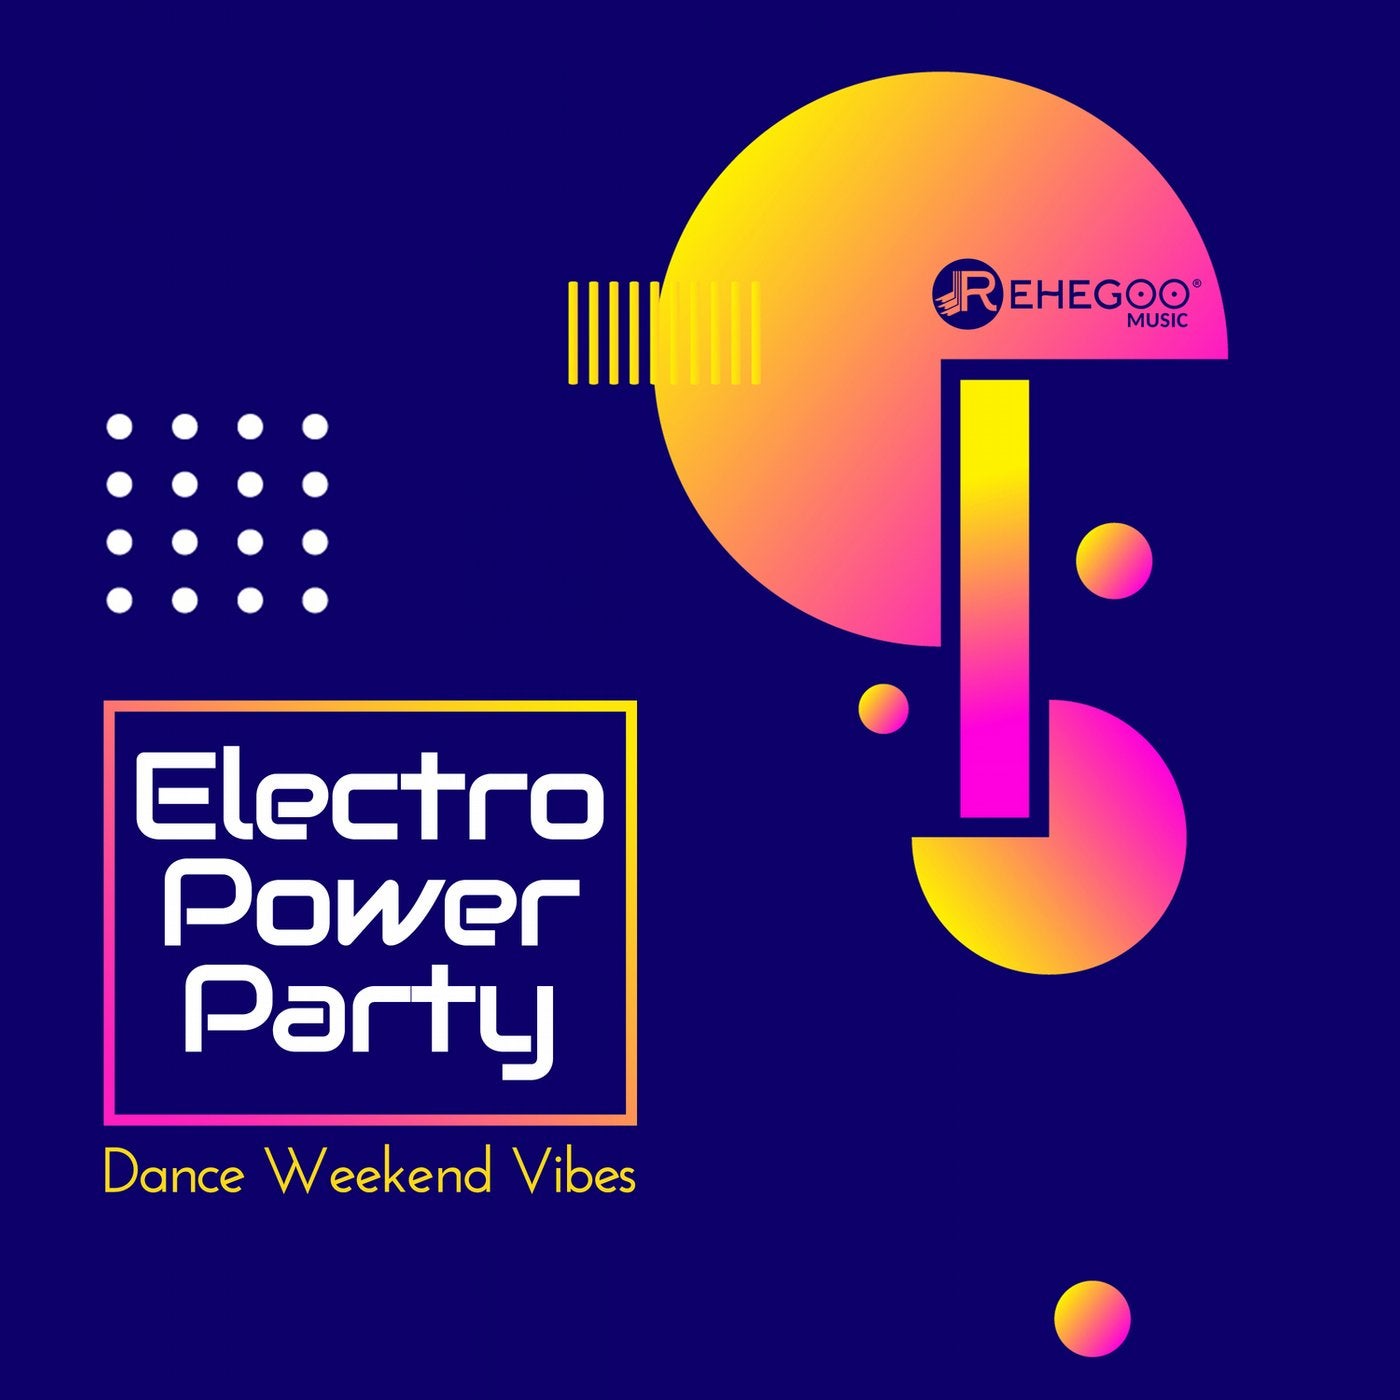 Electro Power Party: Dance Weekend Vibes